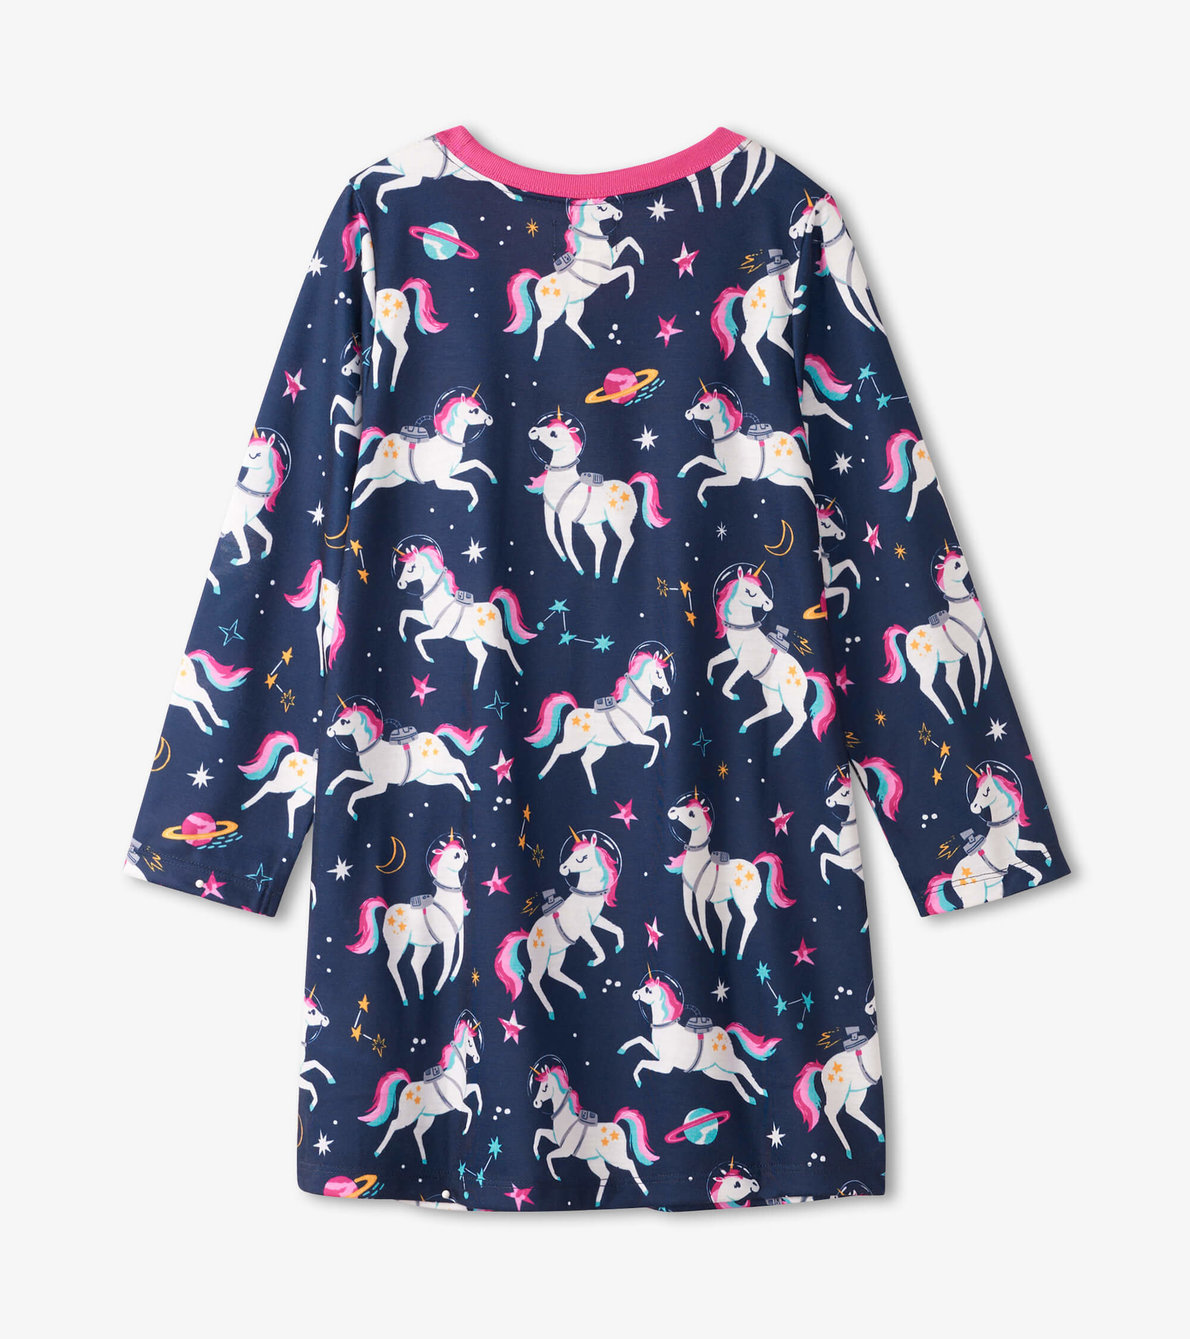 View larger image of Space Unicorns Long Sleeve Nightdress